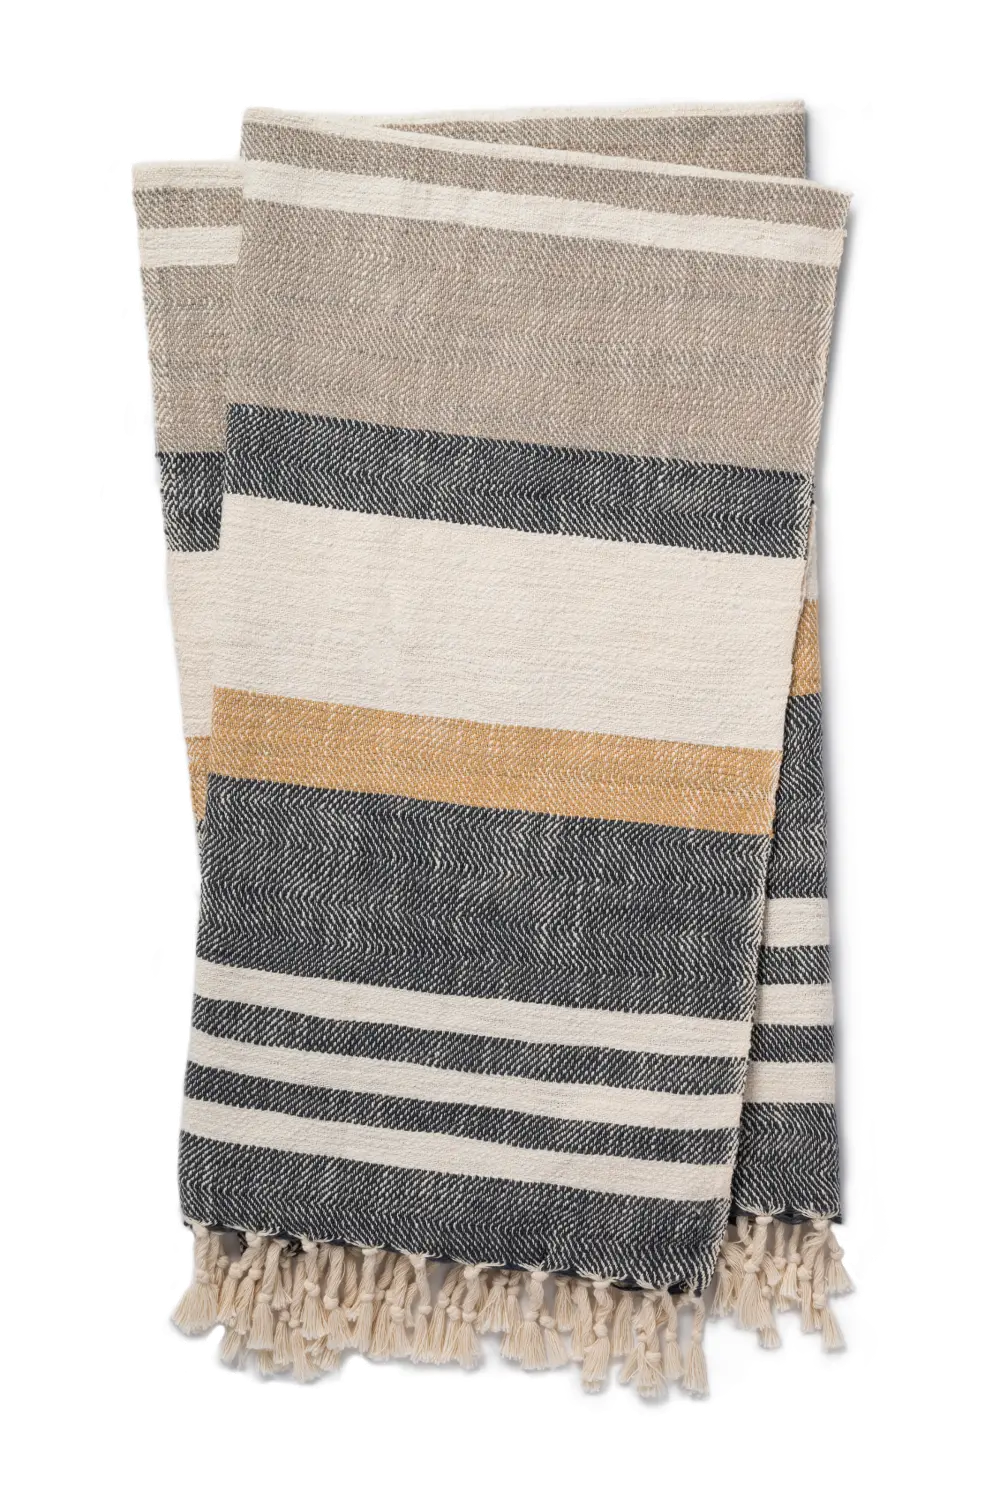 T1036 MH CHARCOAL MULTI Magnolia Home Furniture Charcoal and Multi Color Cotton Throw Blanket-1